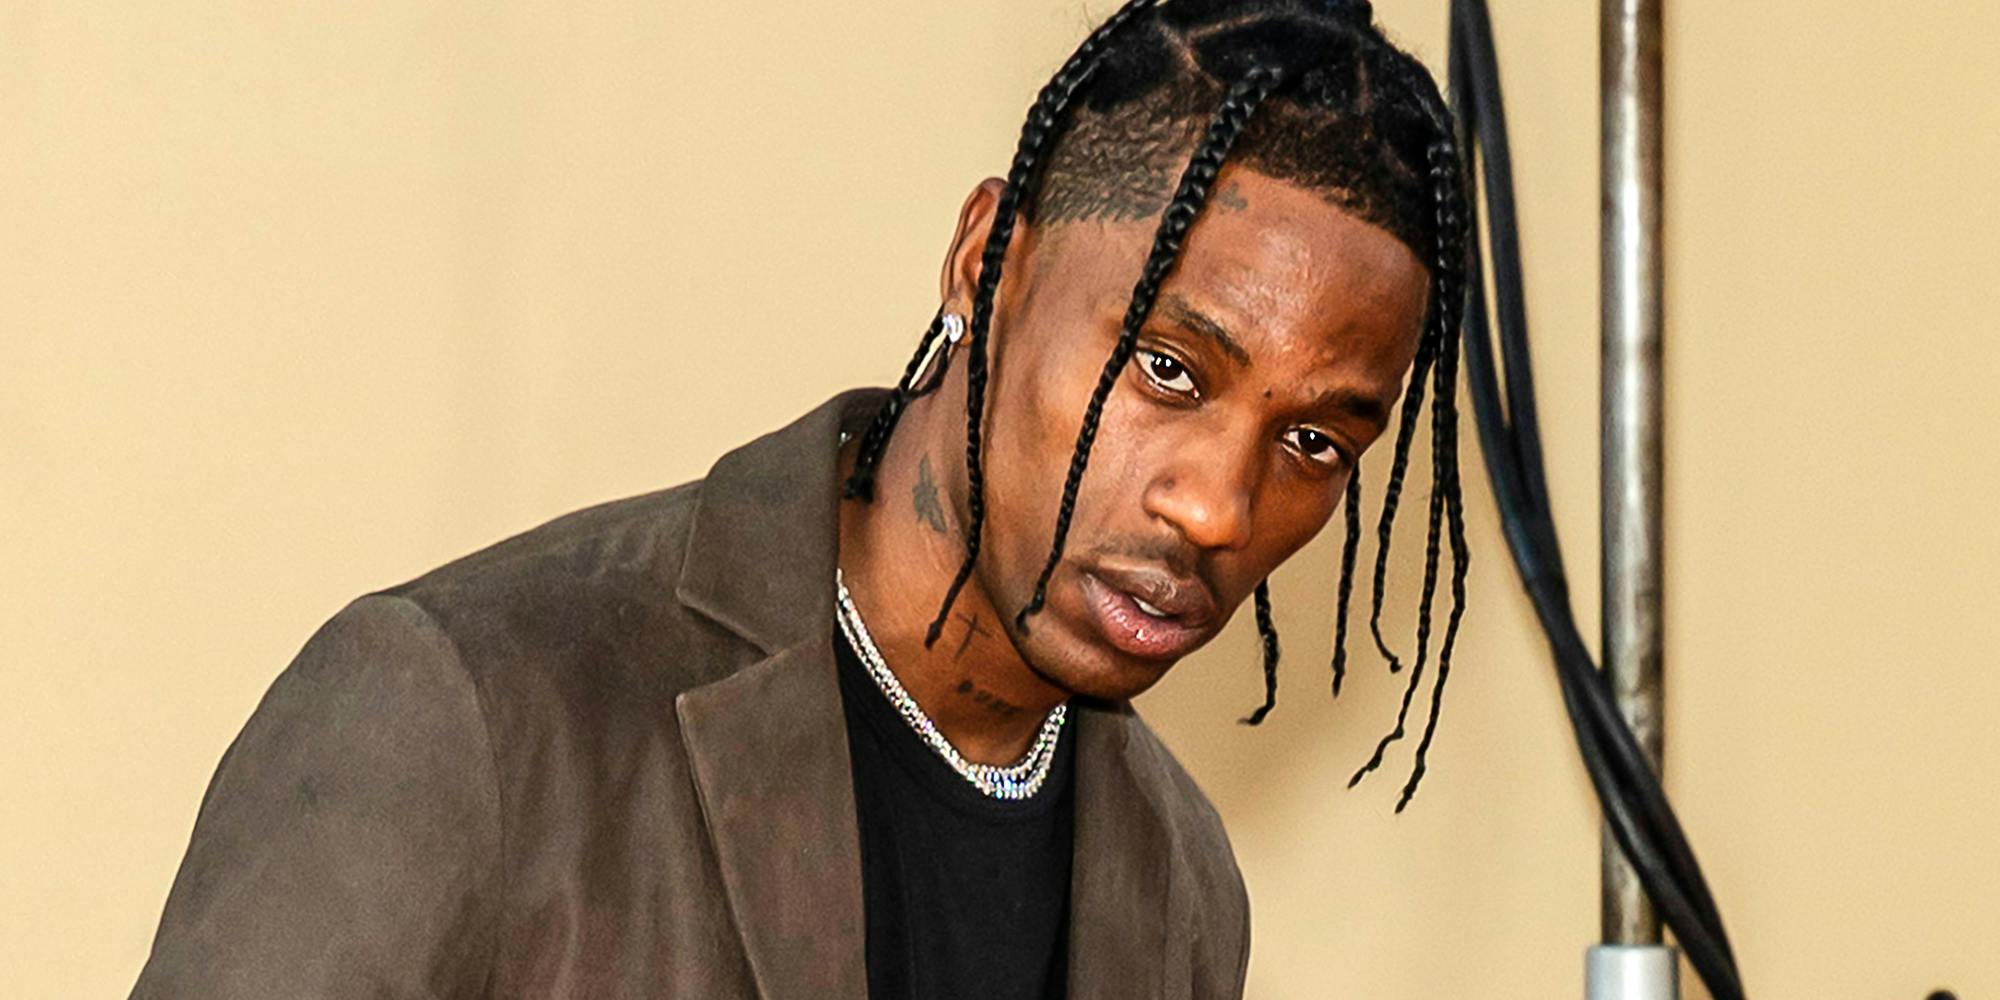 Travis Scott attends The Los Angeles Premiere Of "Once Upon a Time in Hollywood" held at TCL Chinese Theatre